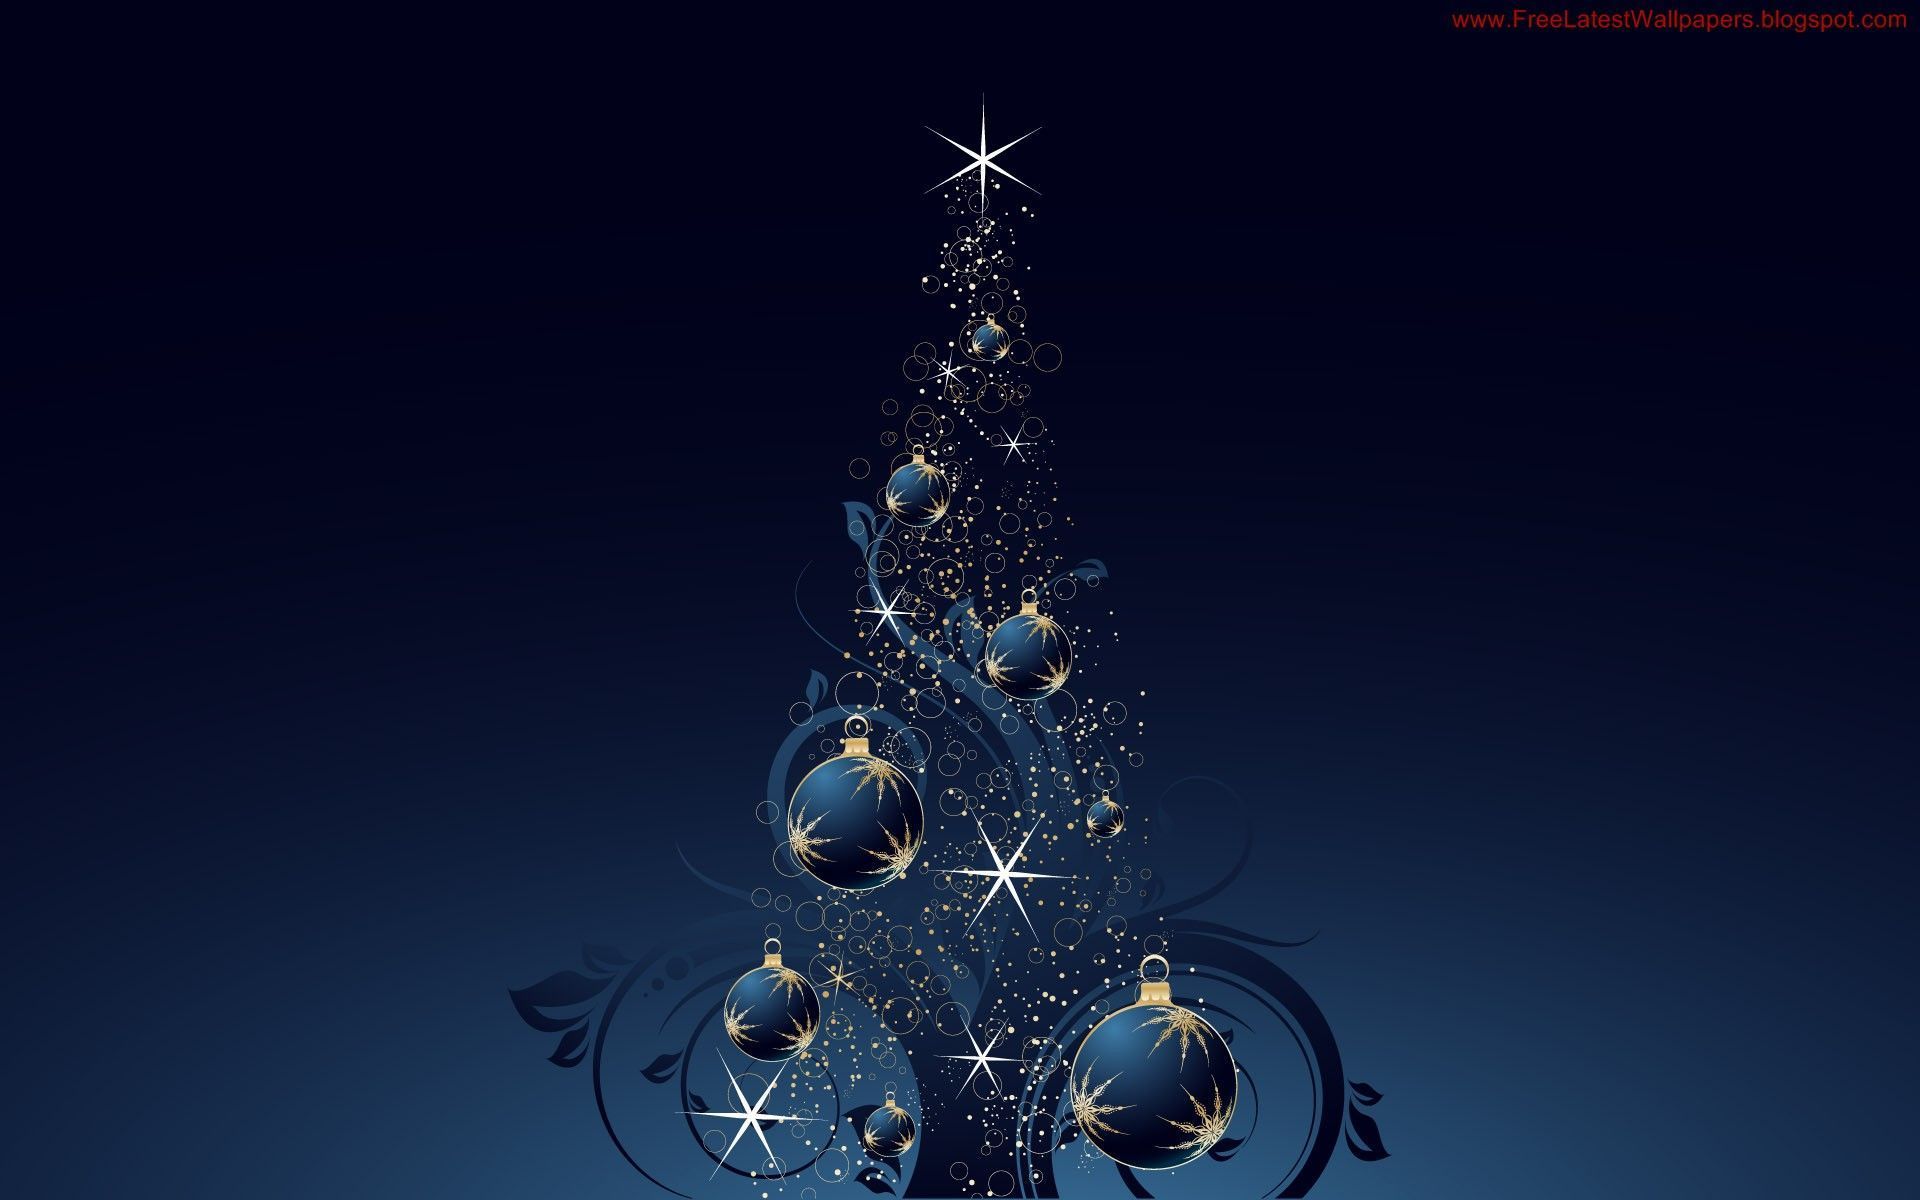 Christmas wallpaper hd - images, photos, pics, pictures Full